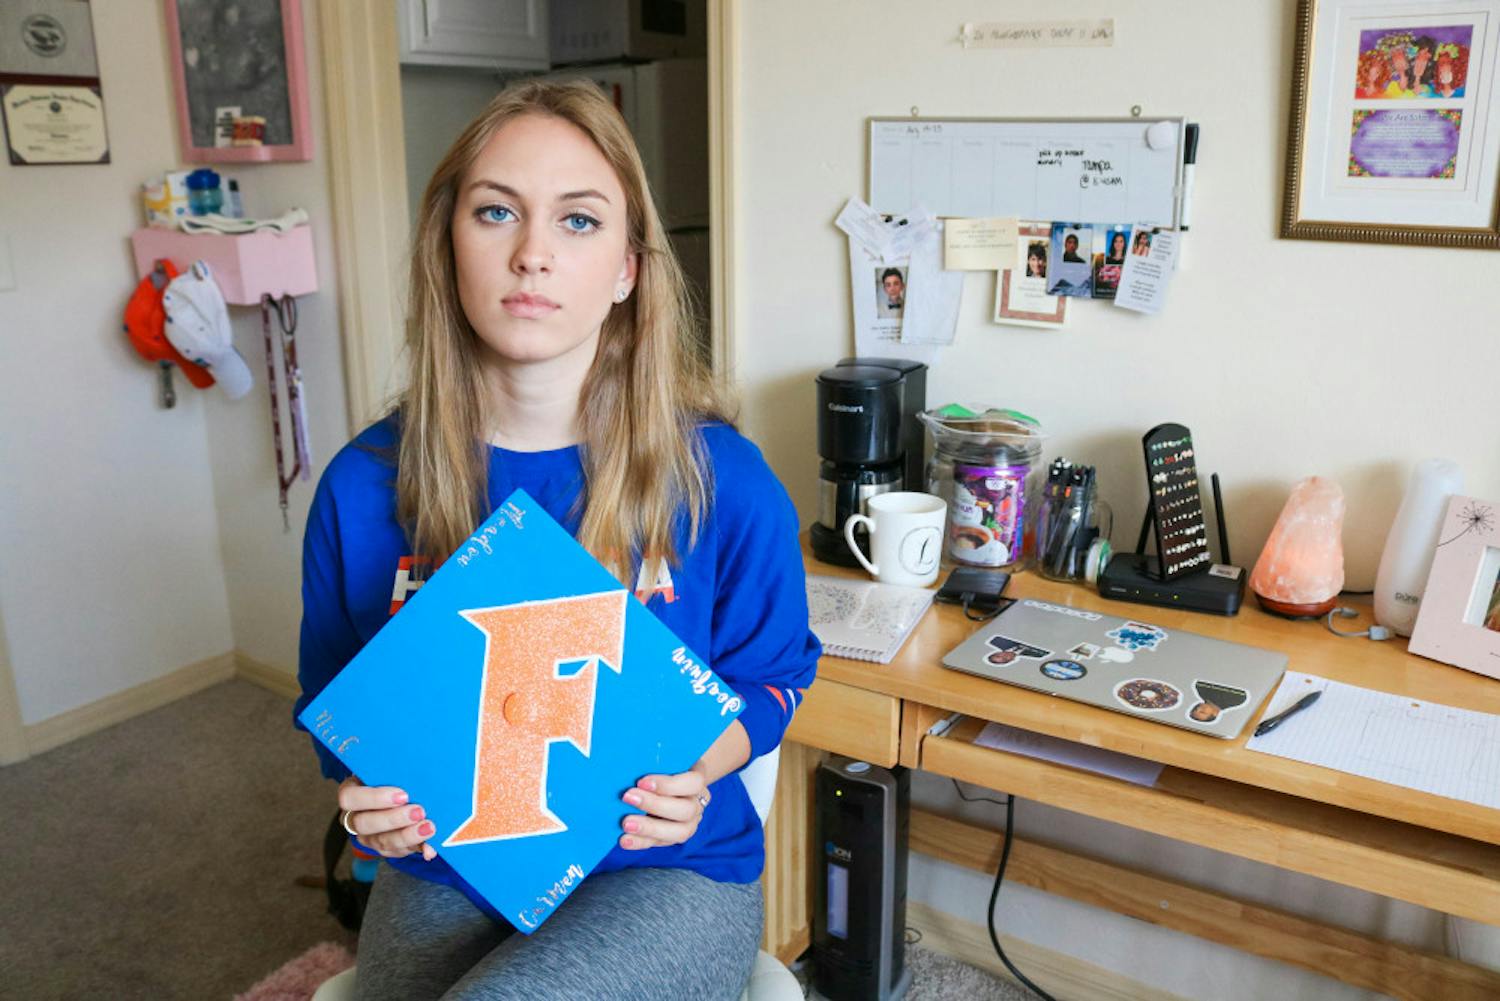 Elizabeth Stout, Parkland survivor and UF political science freshman, shows the cap she made for her graduation from Marjory Stoneman Douglas High School. Stout says she wants it to honor the four seniors that were unable to graduate due to the tragedy: Carmen Schentrup, Nicholas Dworet, Meadow Pollack and Joaquin Oliver.